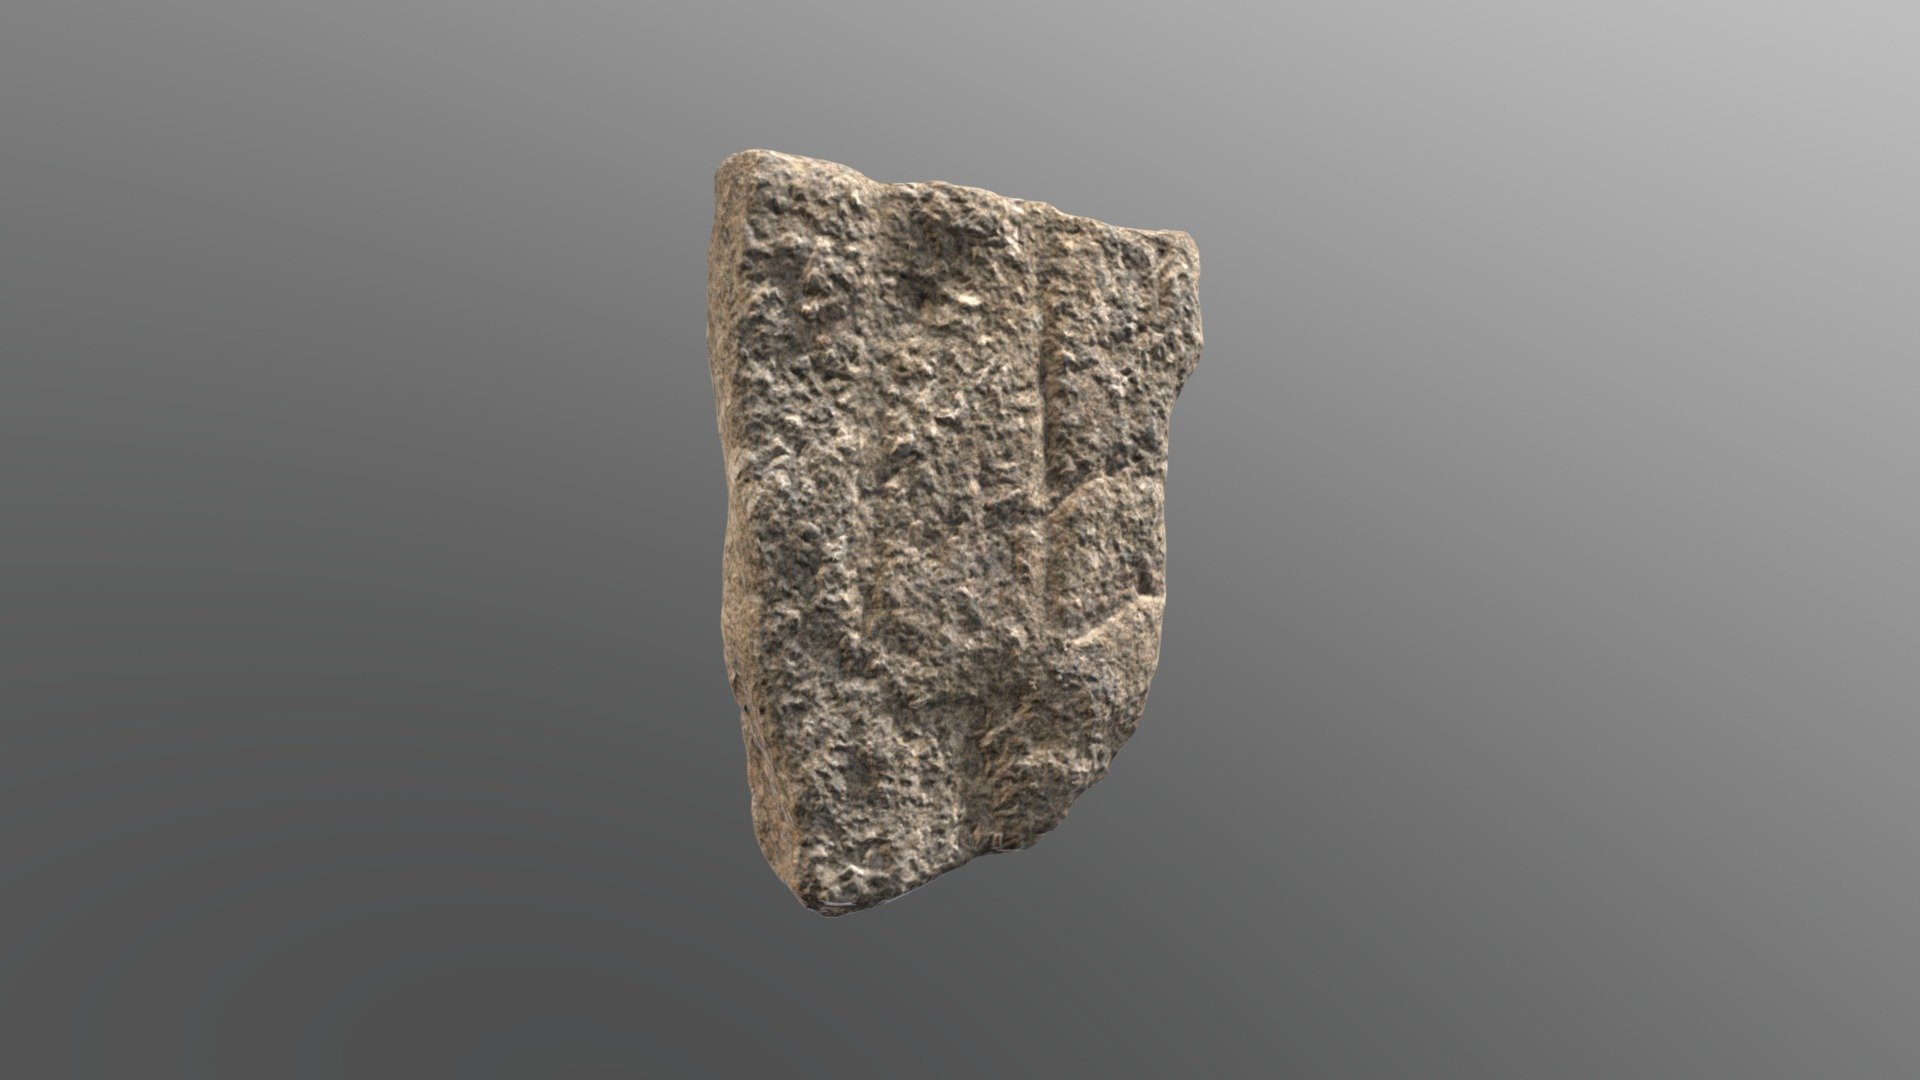 Tullich 11, Carved Cross Stone Fragment